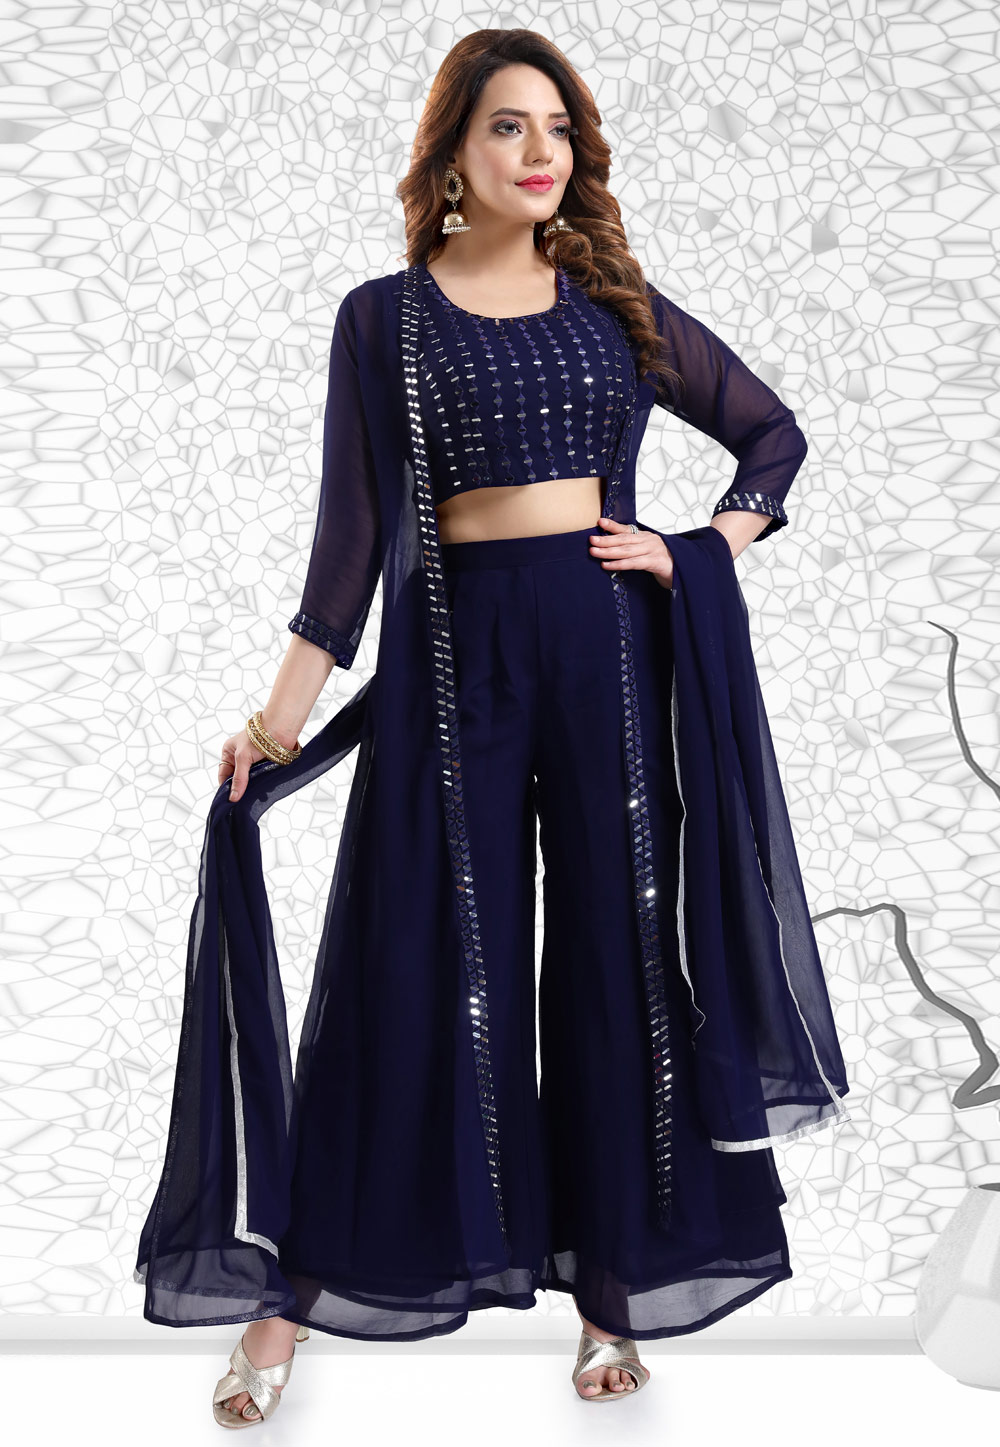 Royal blue formal long blouse and palazzo trousers suit set by Evassè